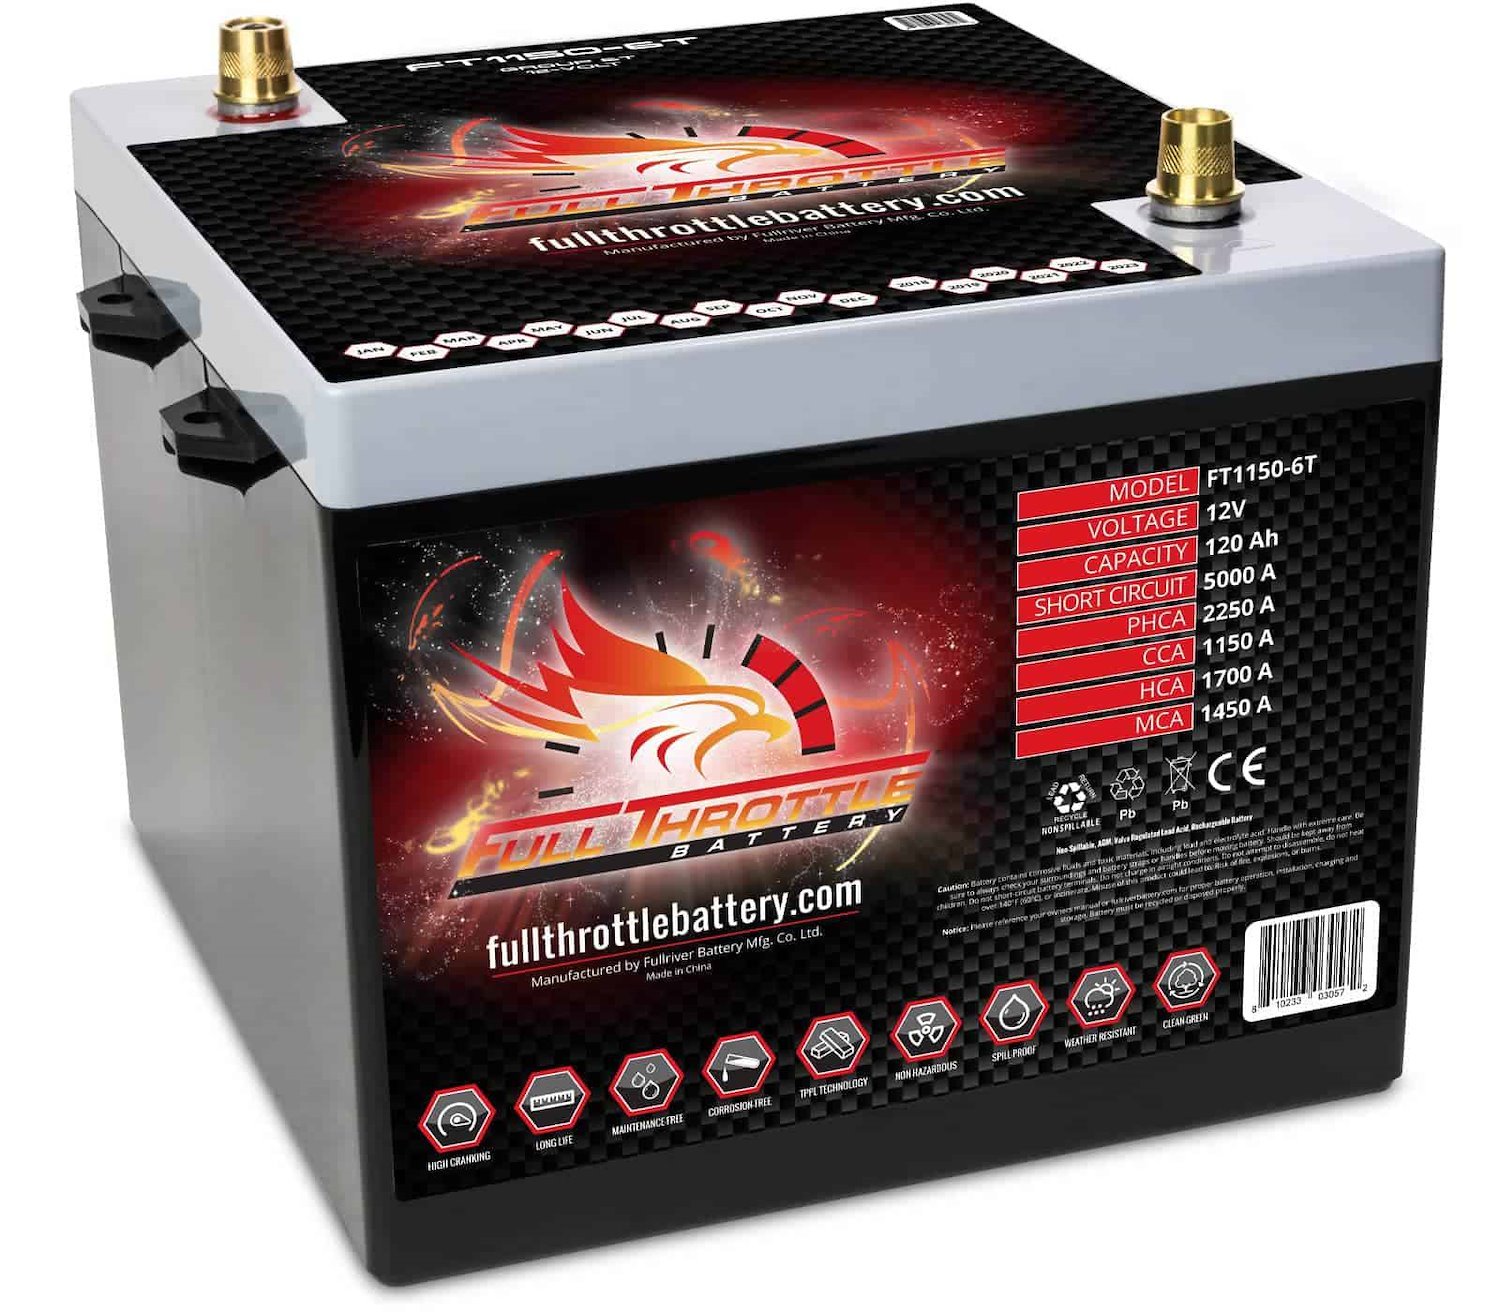 FT1150-6T FT-Series AGM 12 V Battery, Group: 6TL, 1150 CCA, 120 AH, Brass SAE Terminal